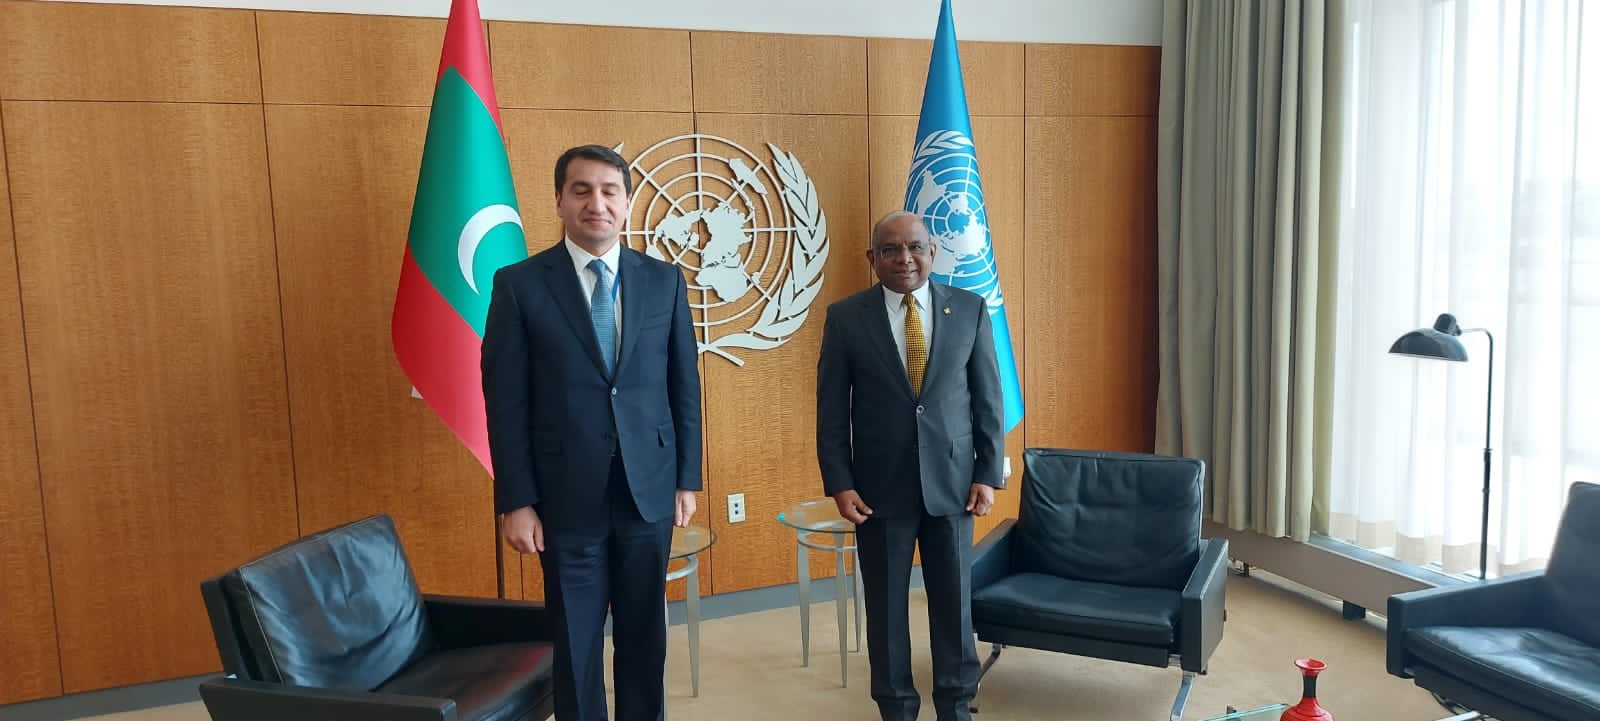 UN General Assembly president visits Azerbaijan - Gallery Image